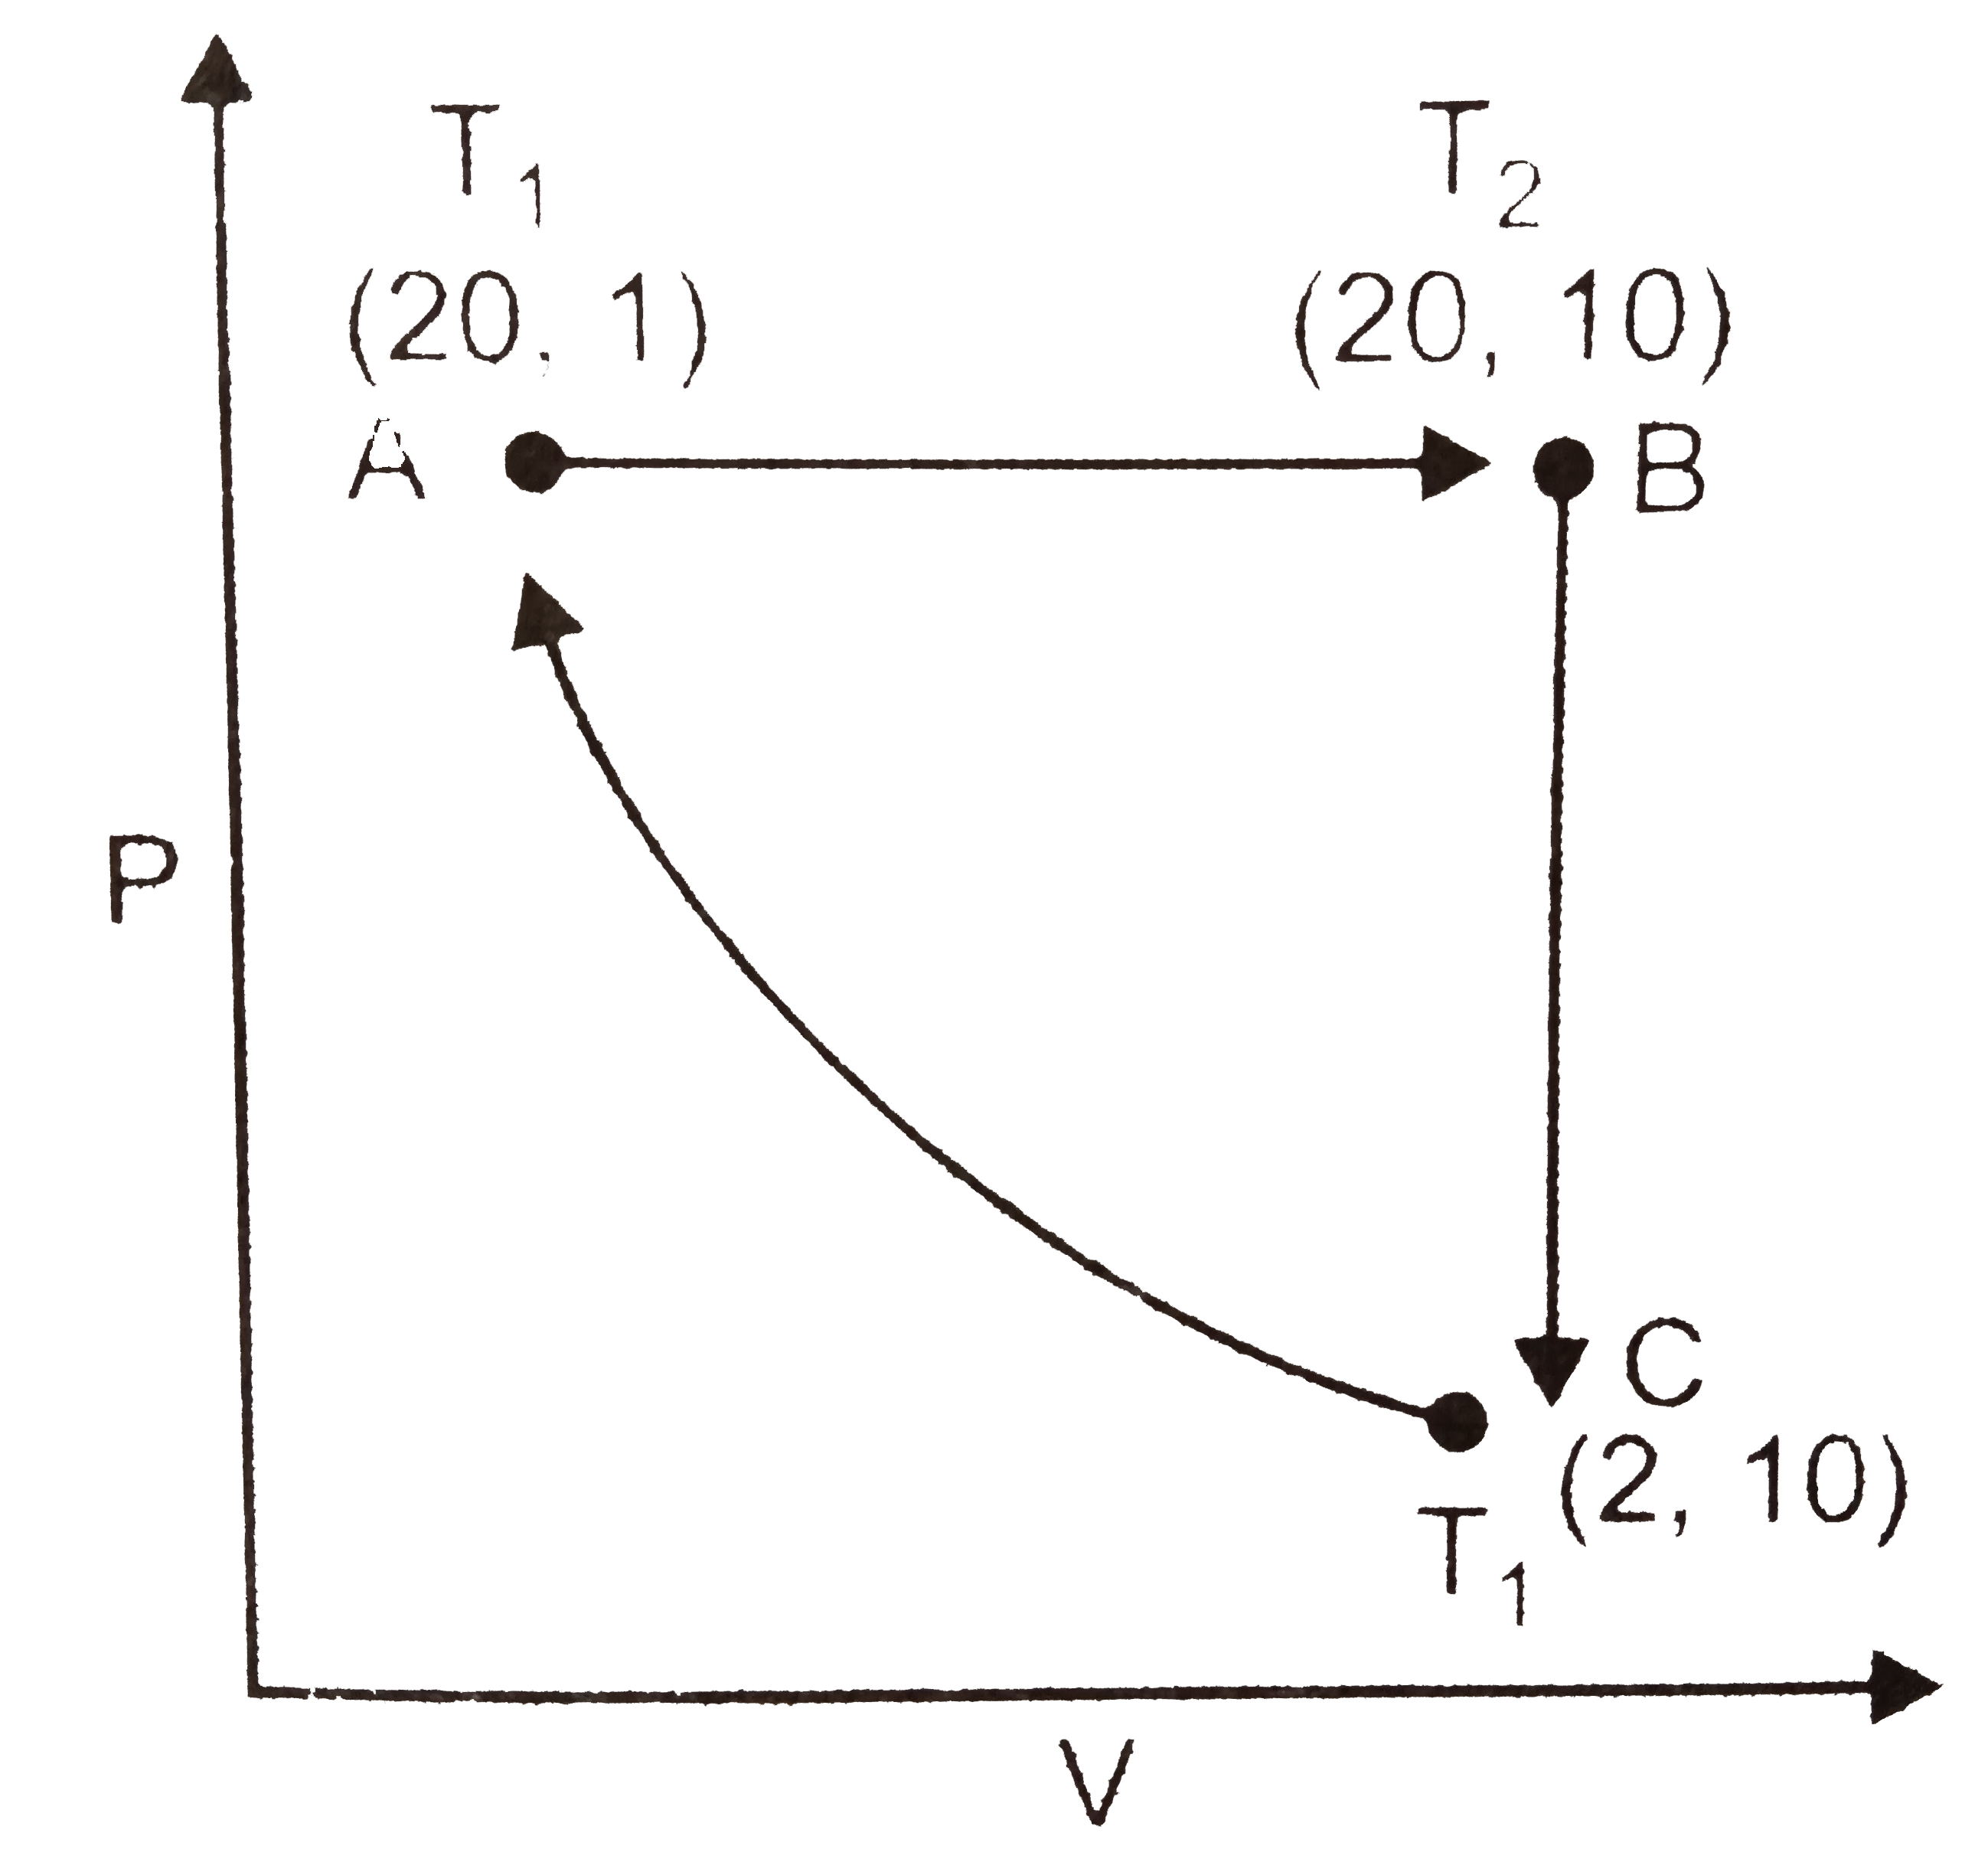 One mole of a perfect gas is put through a cycle consisting of the following three reversible steps:      (CA) isothermal compression from 2 atm and 10 litre to 20 atm and 1 litre.    (AB) Isobaric expansion to return the gas to the original volume of 10 litre with T going from T(1) to T(2).   (BC) Cooling at constnat volume to bring the gas to the original pressure and temperature. the steps are shown schematically in the figure shown.   (a) Calculate T(1) and T(2).   (b) Calculate DeltaU,q and W in calories, for each step and for the cycle.